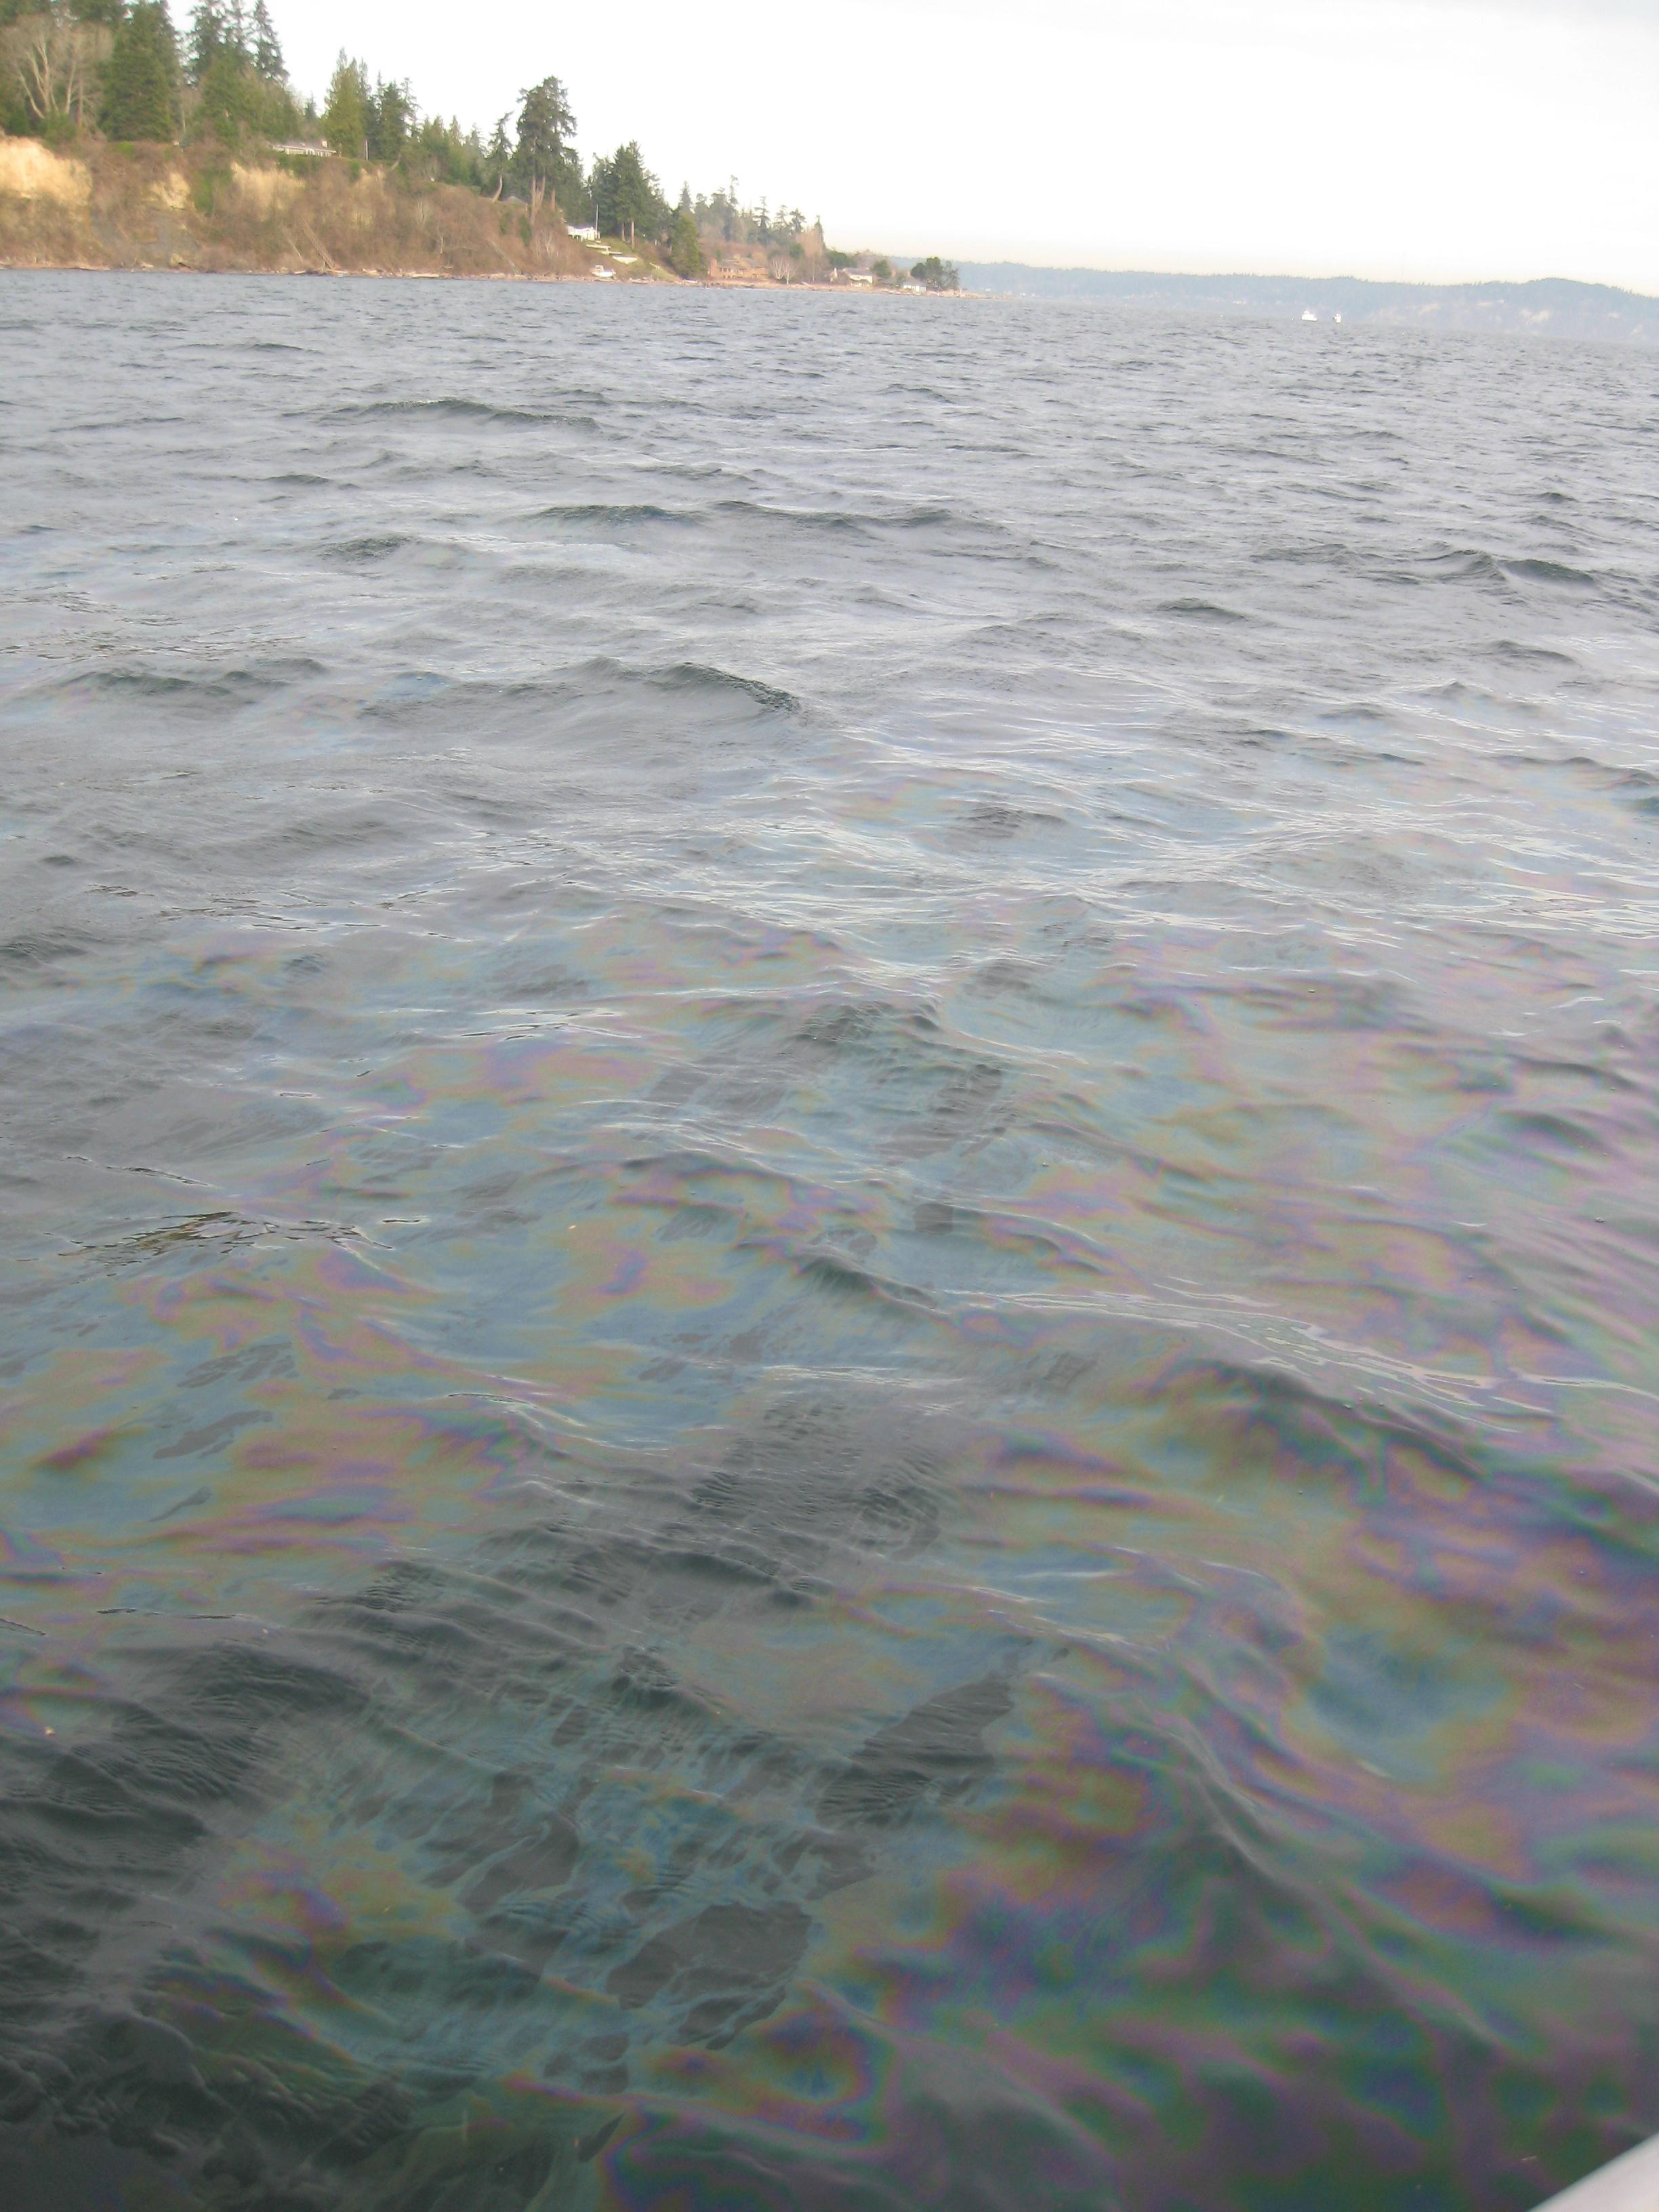 Sheen from an oil spill near Eagle Harbor in Kitsap County